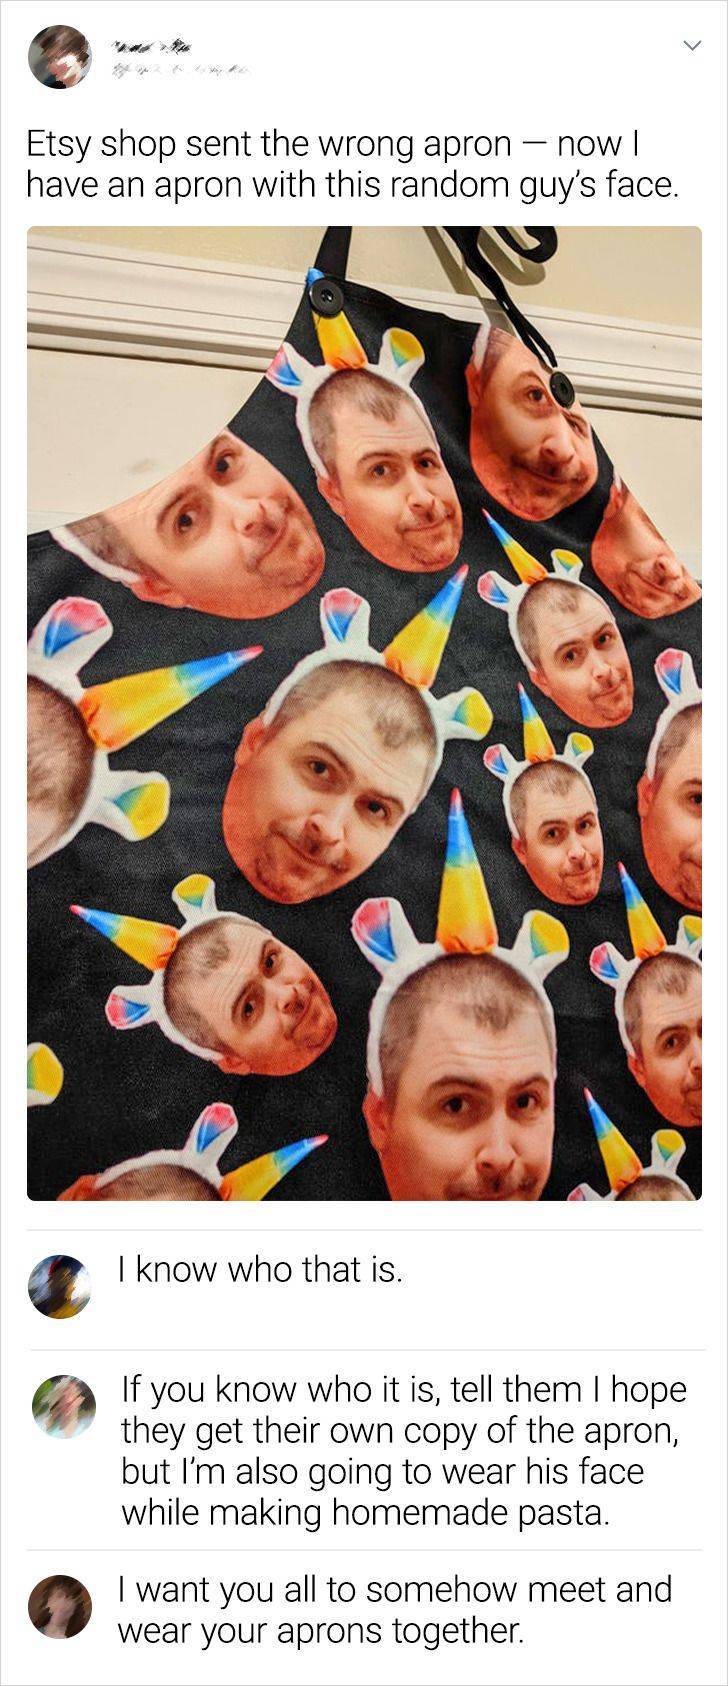 poster - Etsy shop sent the wrong apron now have an apron with this random guy's face. I know who that is. If you know who it is, tell them I hope they get their own copy of the apron, but I'm also going to wear his face while making homemade pasta. I wan